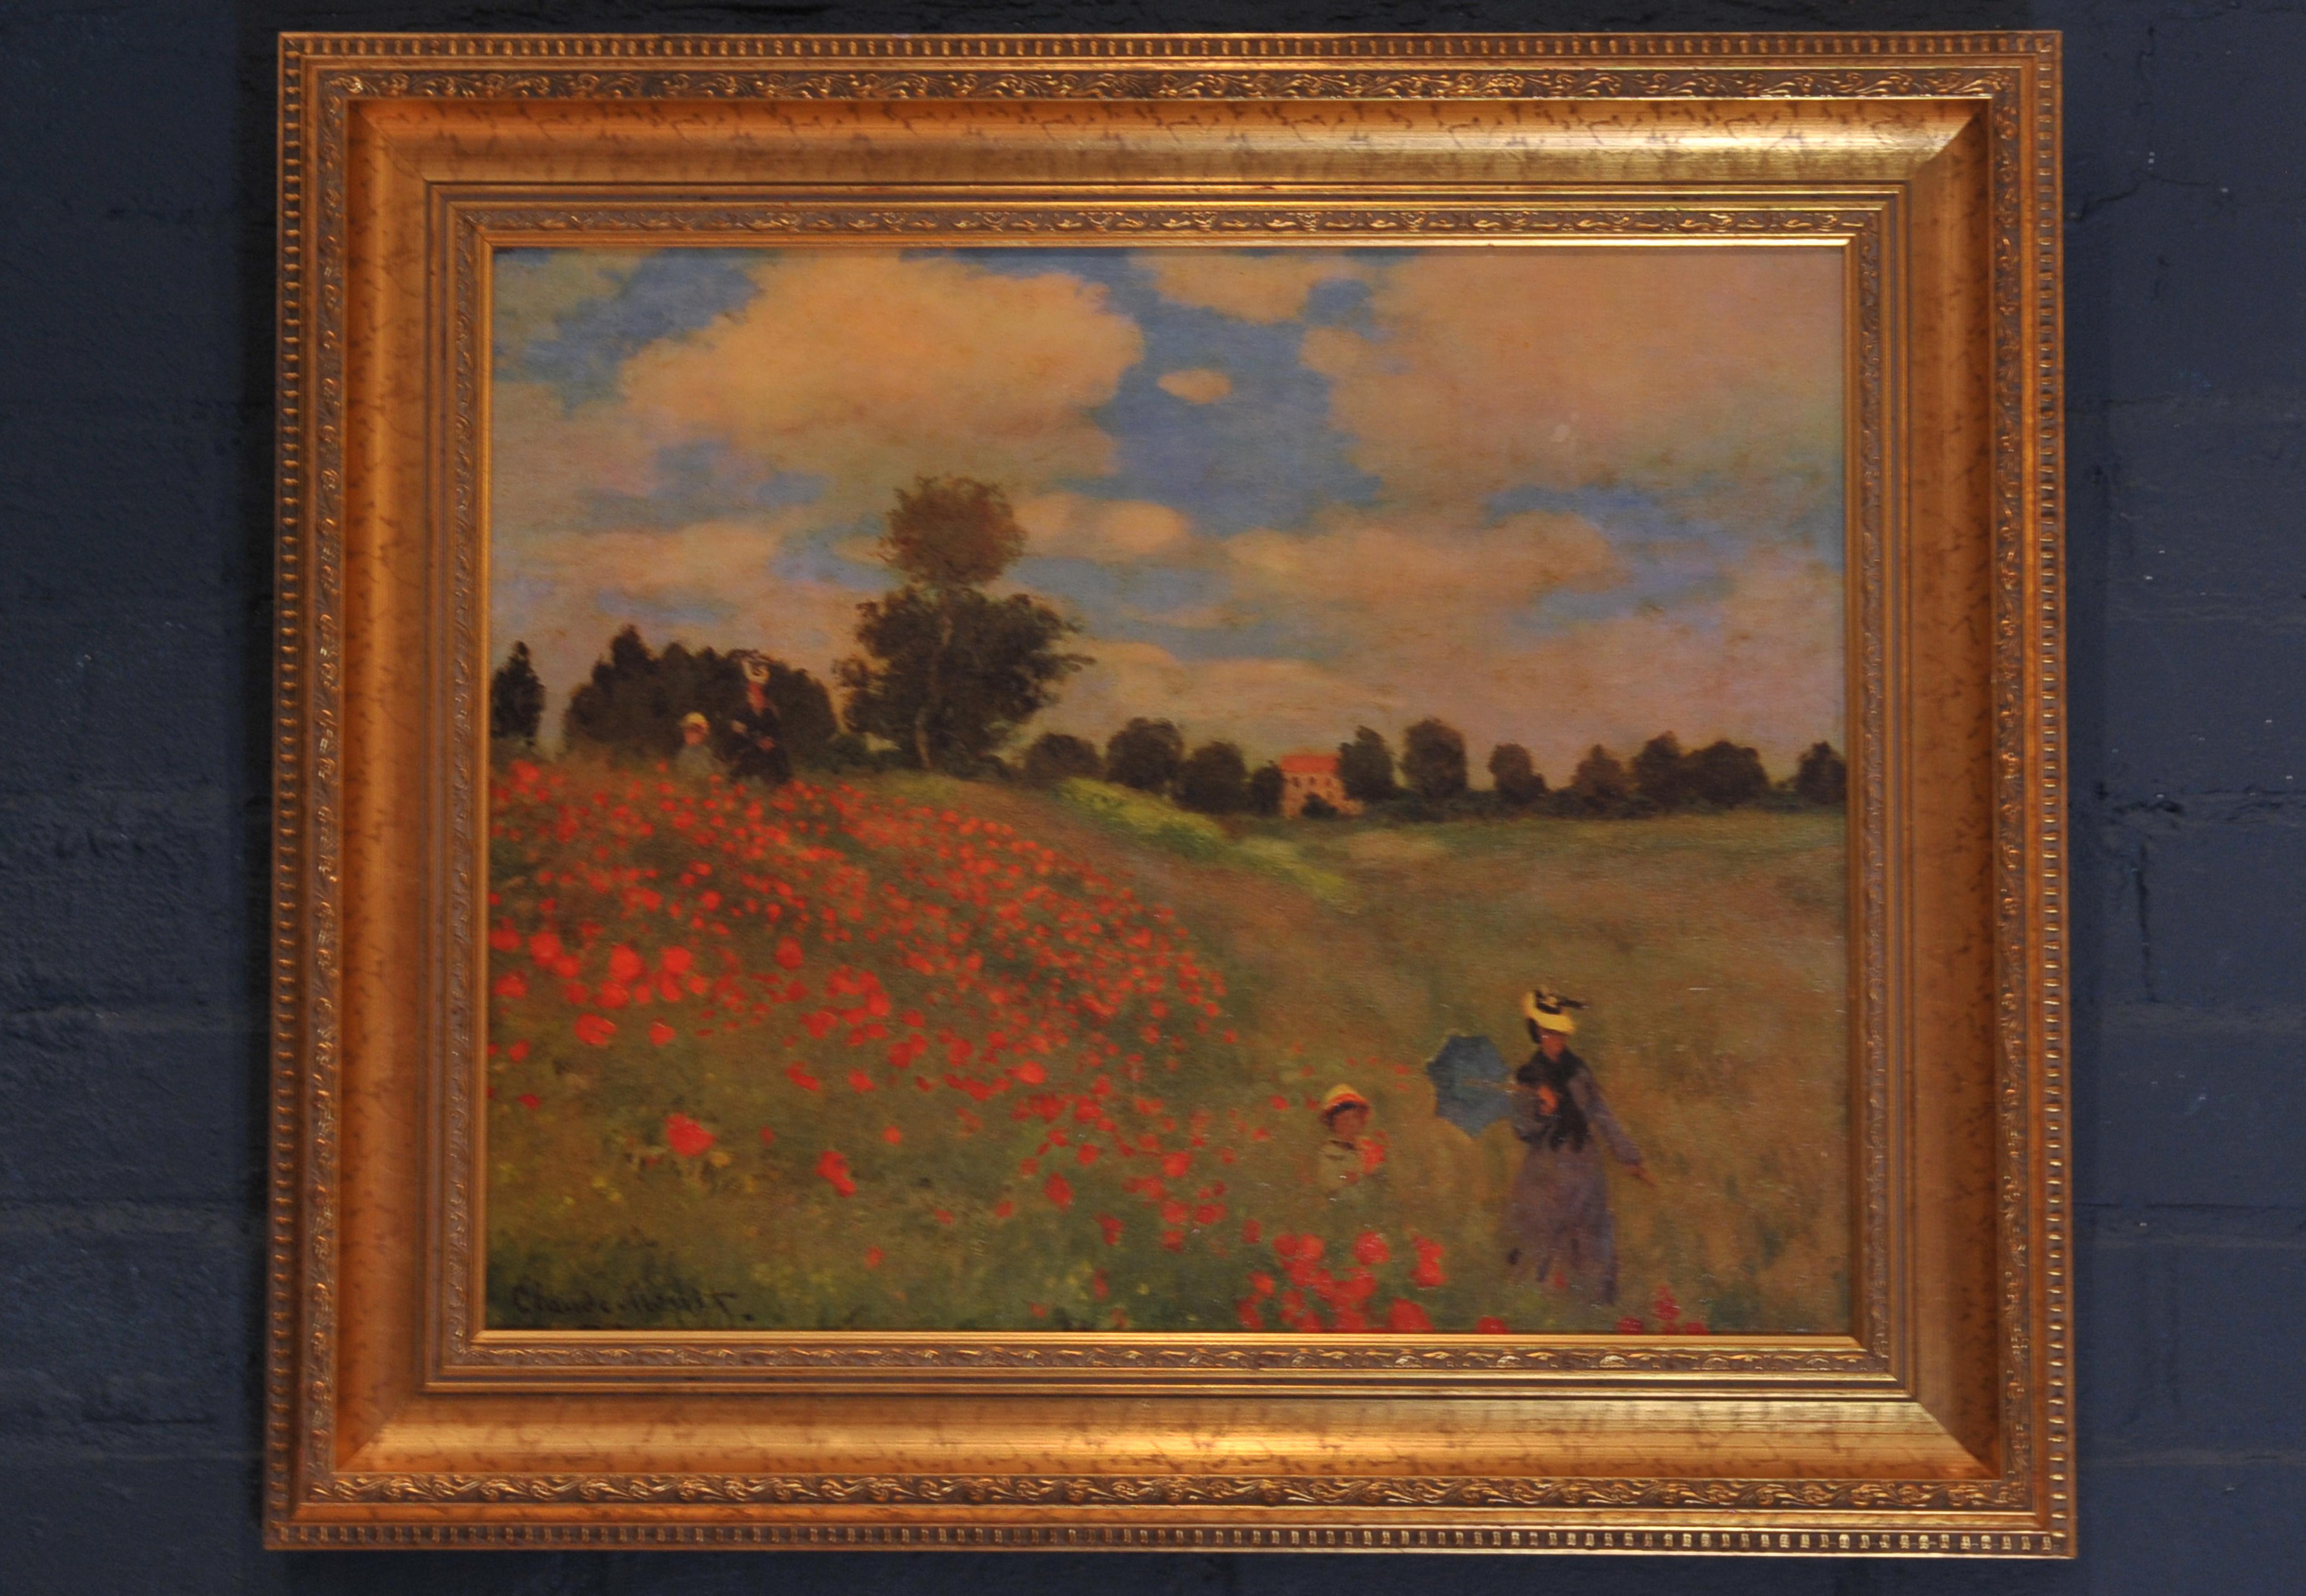 French Provincial Claude Monet Les Coquelicots 1873 Reproduction Oil Painting With Gilt Frame For Sale